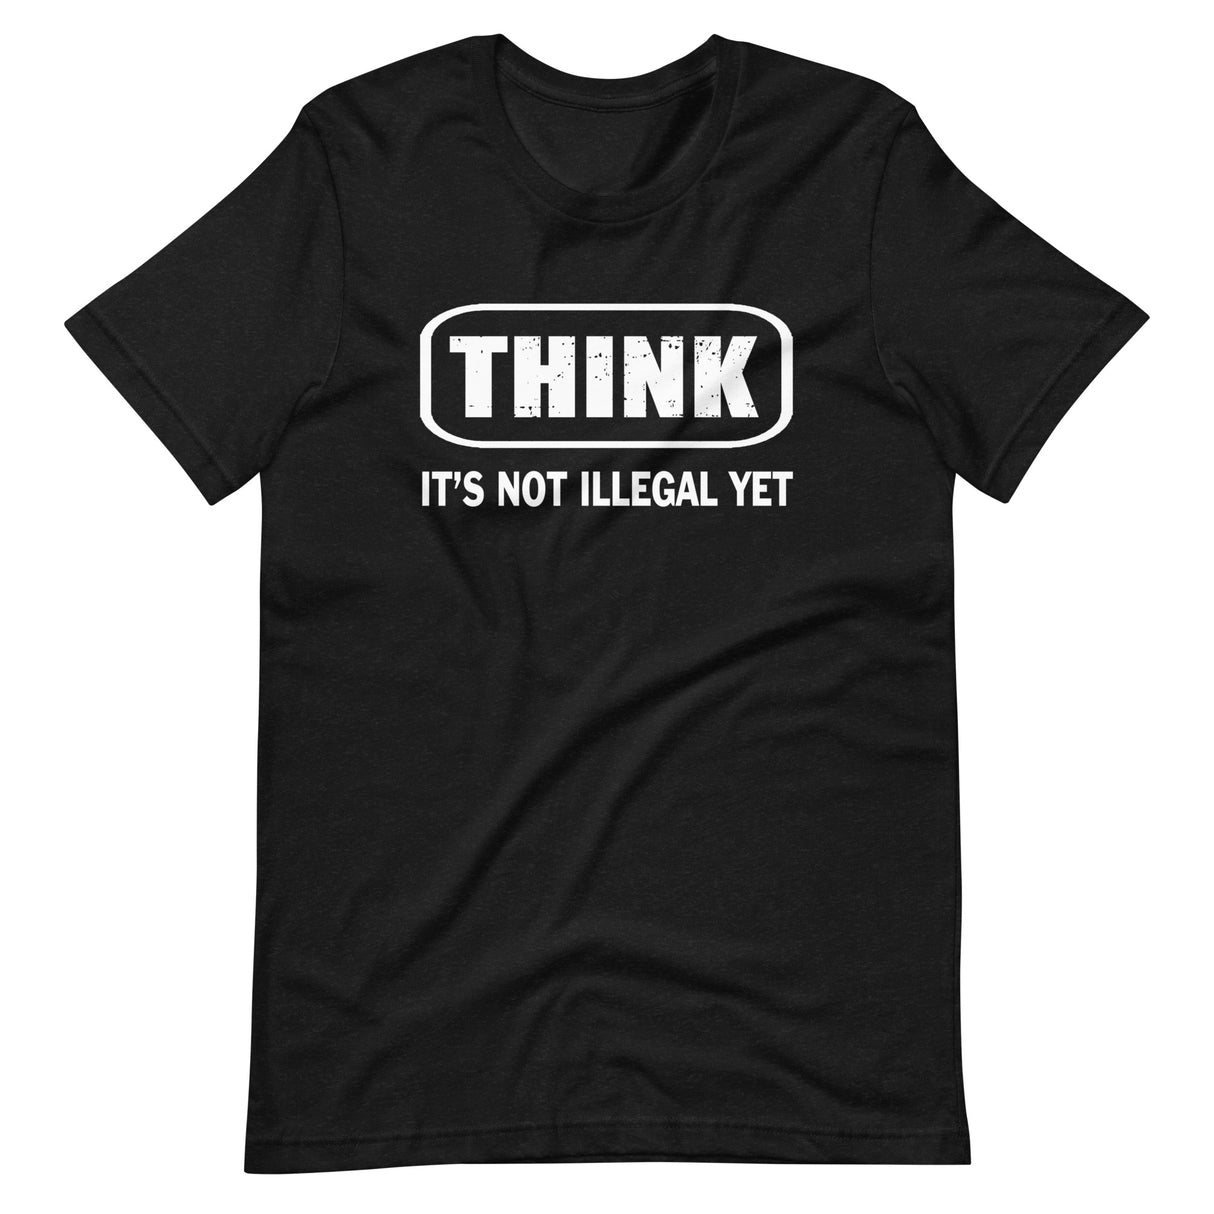 Think It's Not Illegal Yet Shirt by Libertarian Country